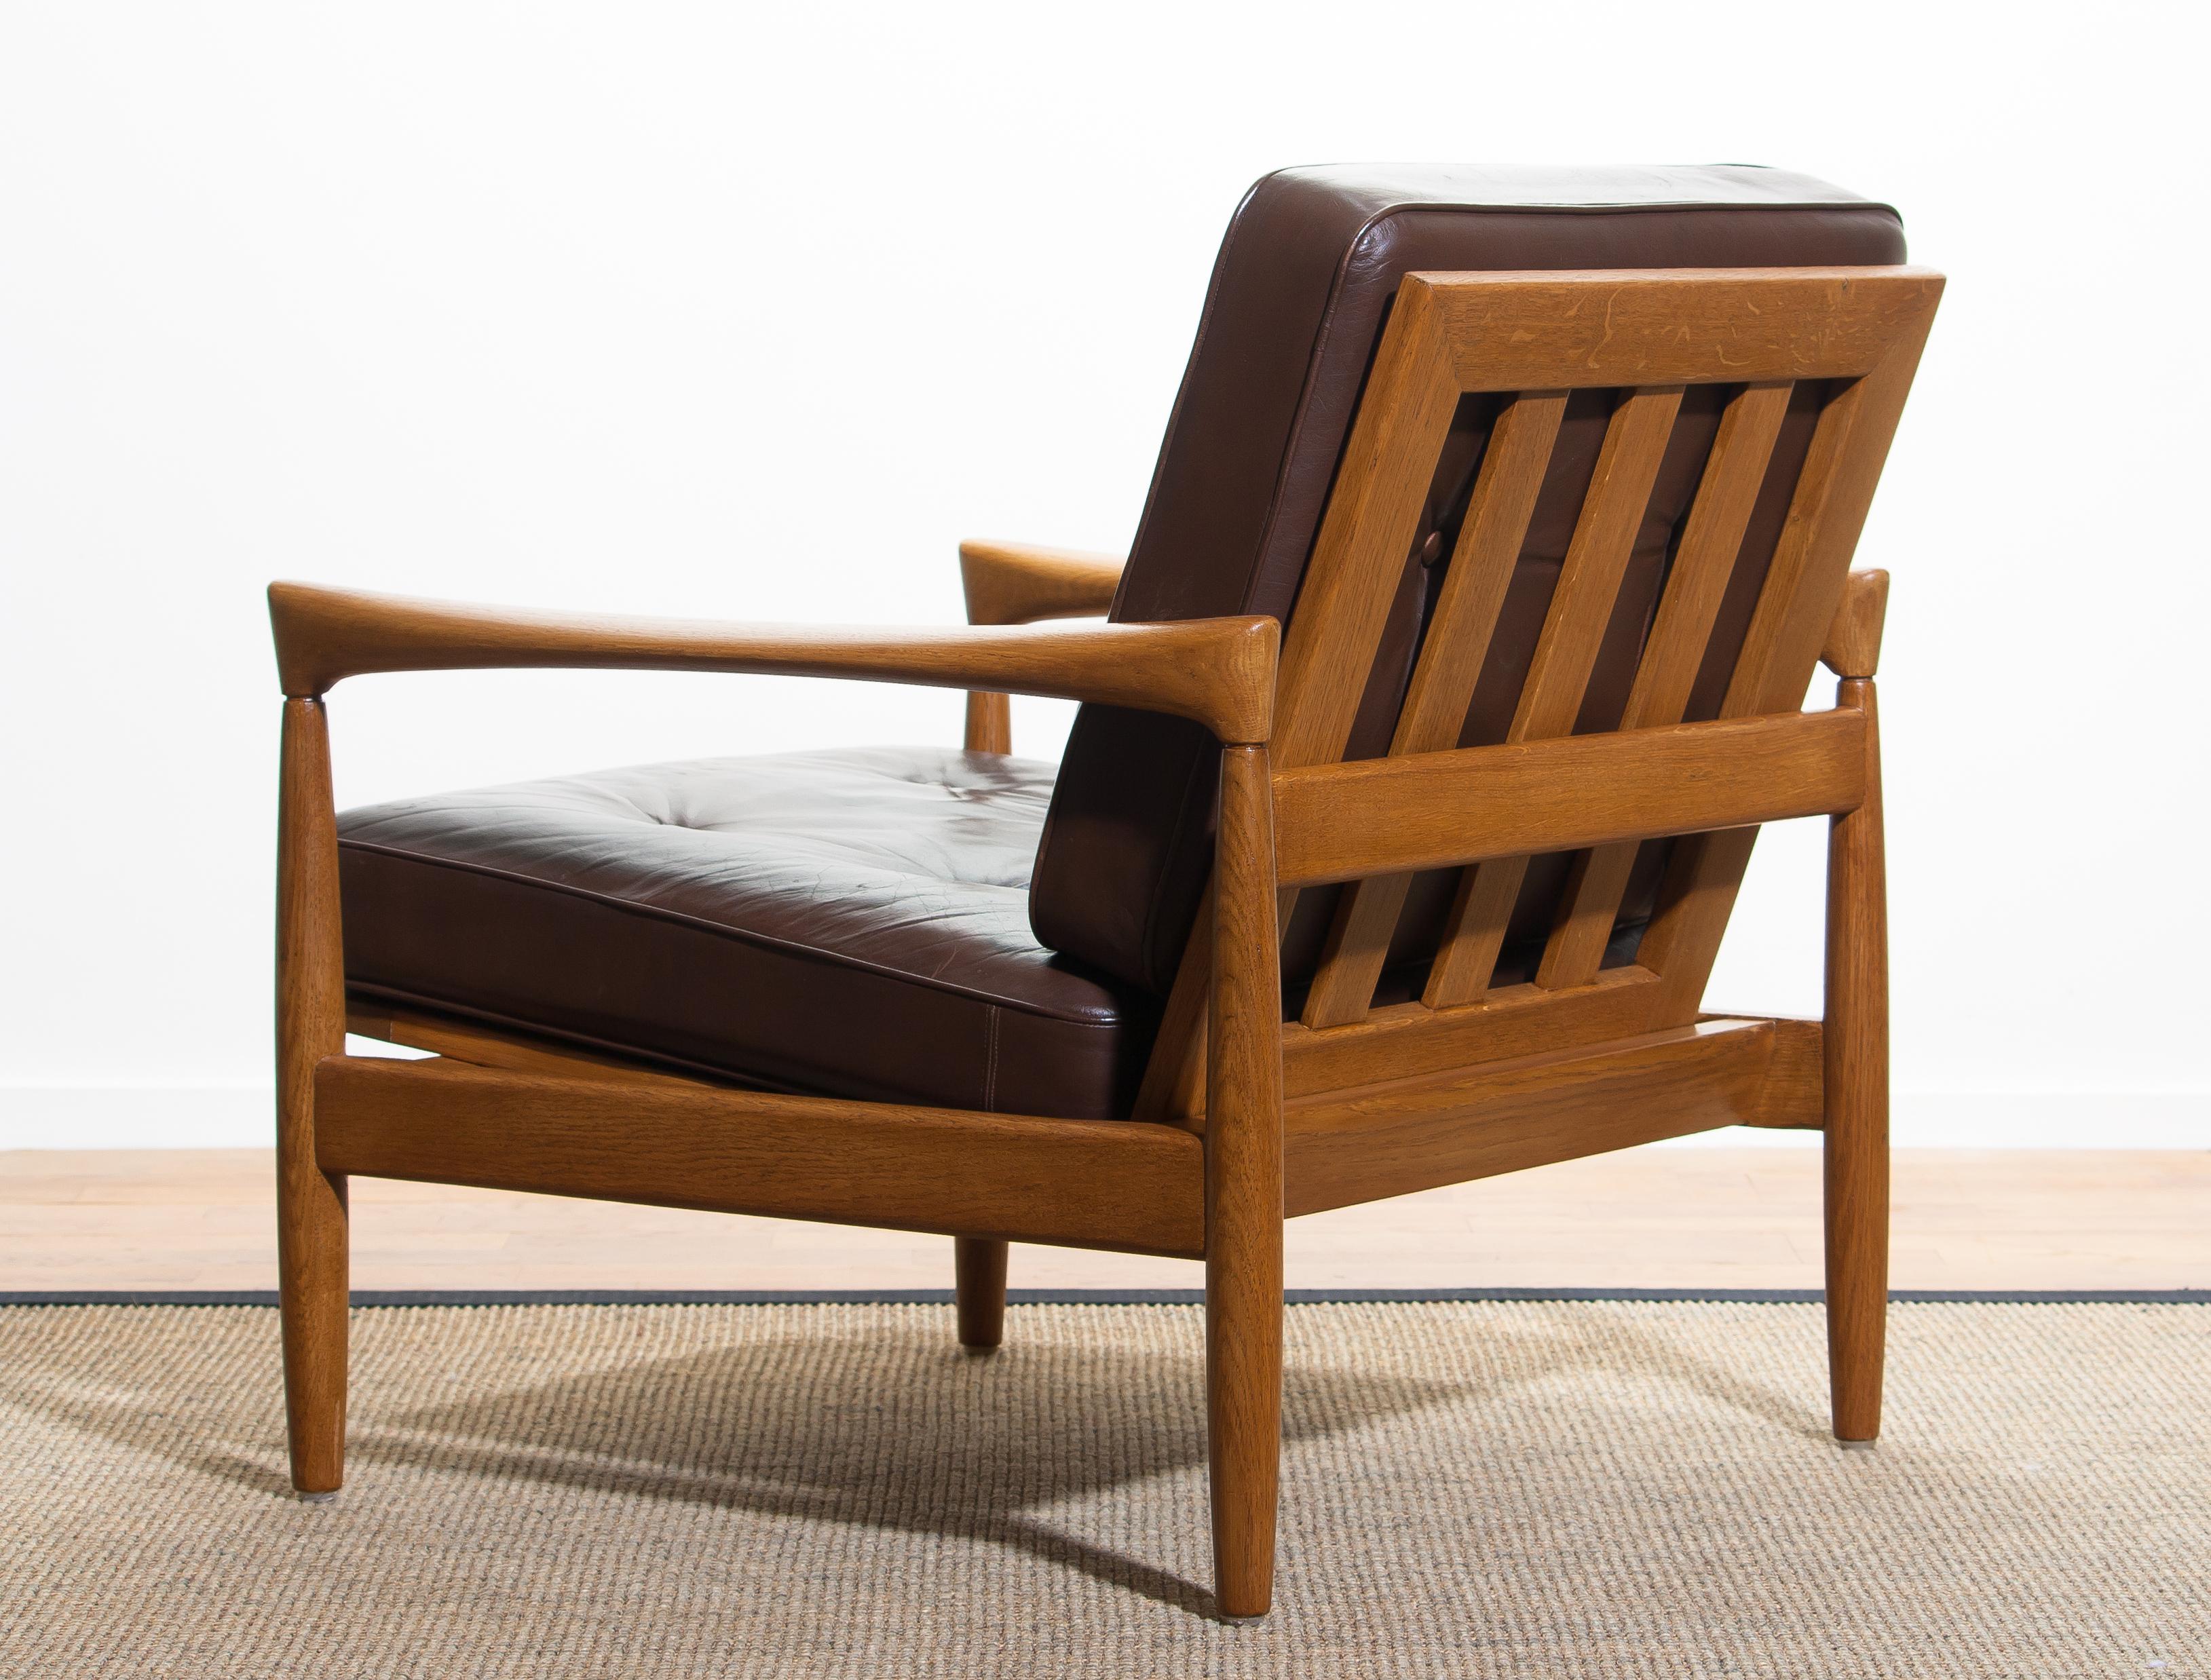 1960s, Oak with Brown Leather Lounge Chair by Erik Wörtz for Bröderna Anderssons 2